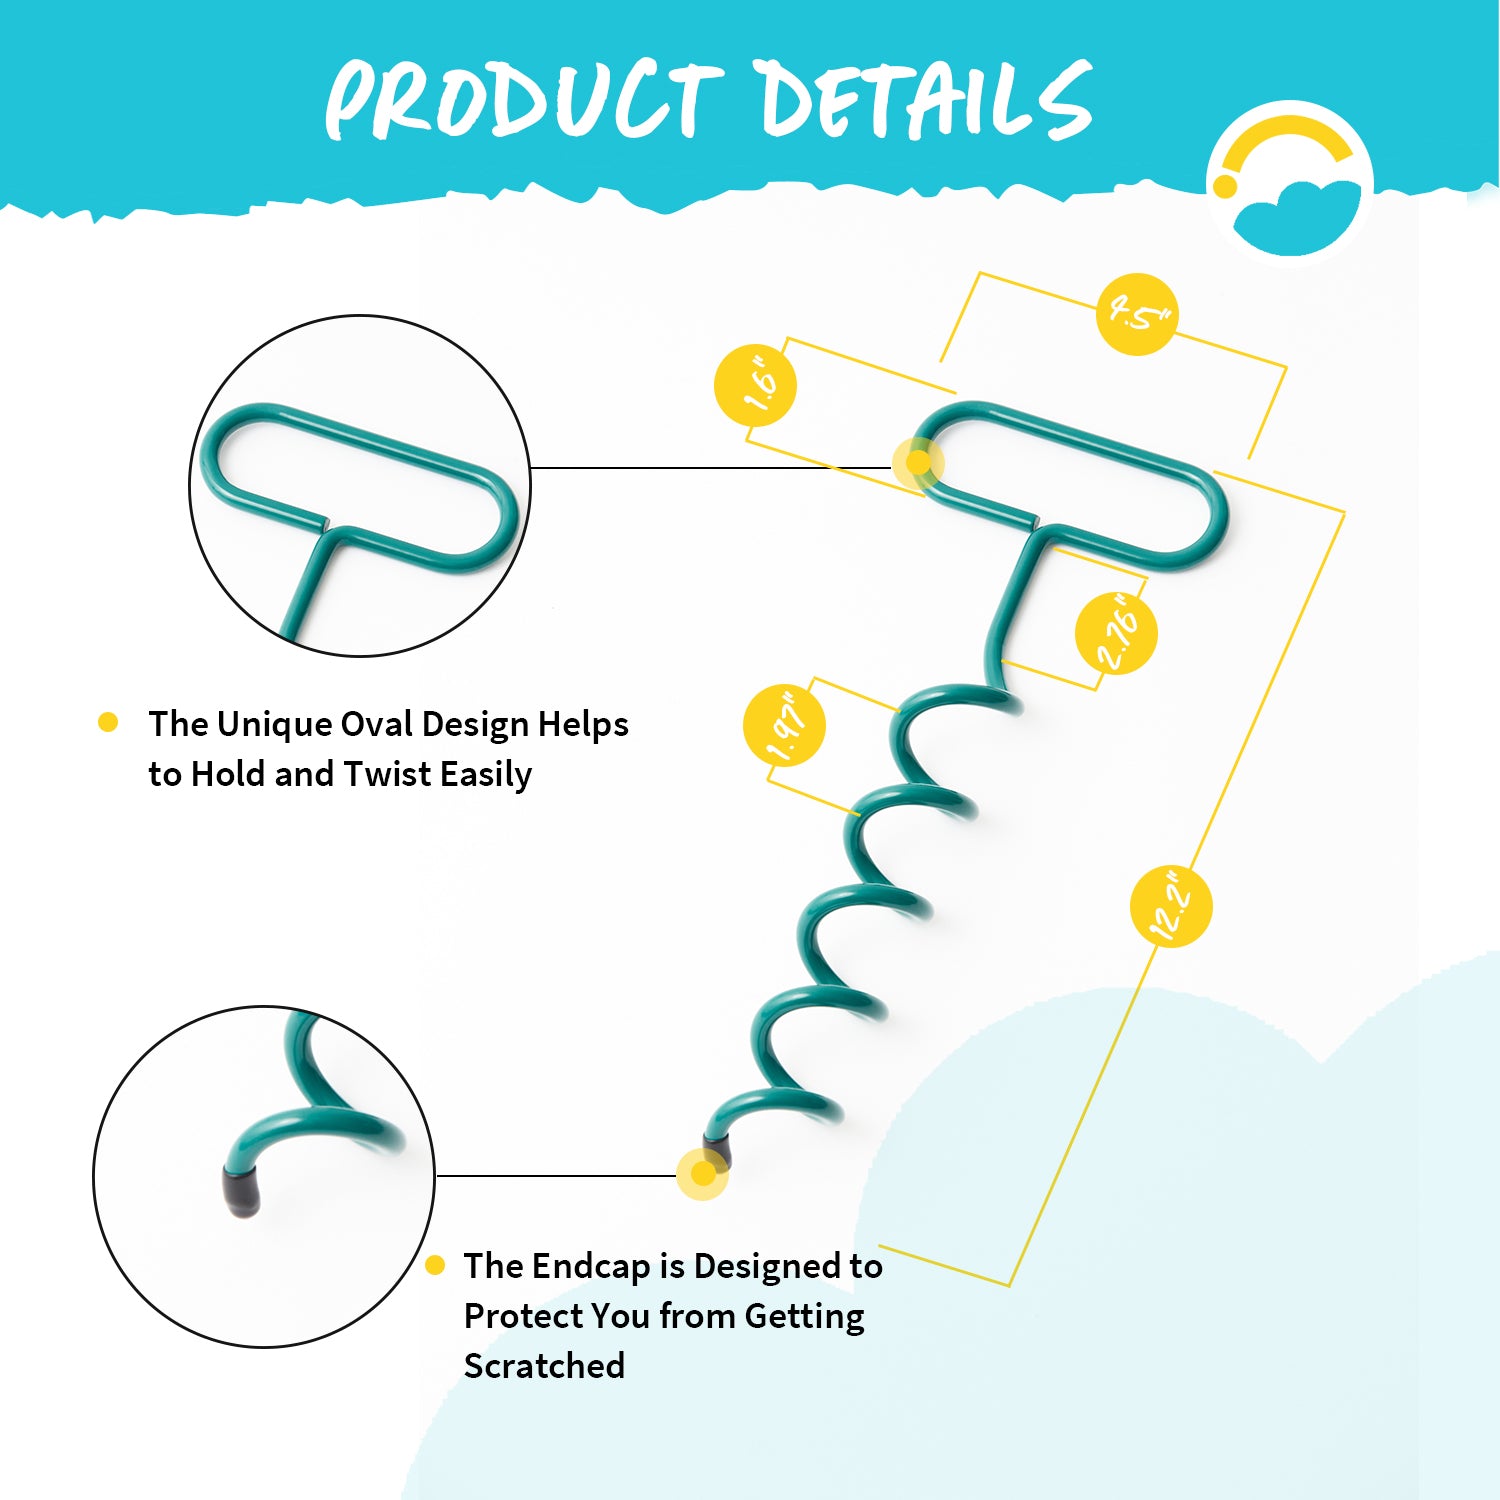 Product Details: The Unique Oval Design Helps to Hold and Twist Easily. The Endcap is Designed to Protect You from Getting Scratched. Height 12.2", Width of Handle Bar 4.5", Height of Handle 1.6", Height between Handle Bar and first spiral. 1.97" between spirals.